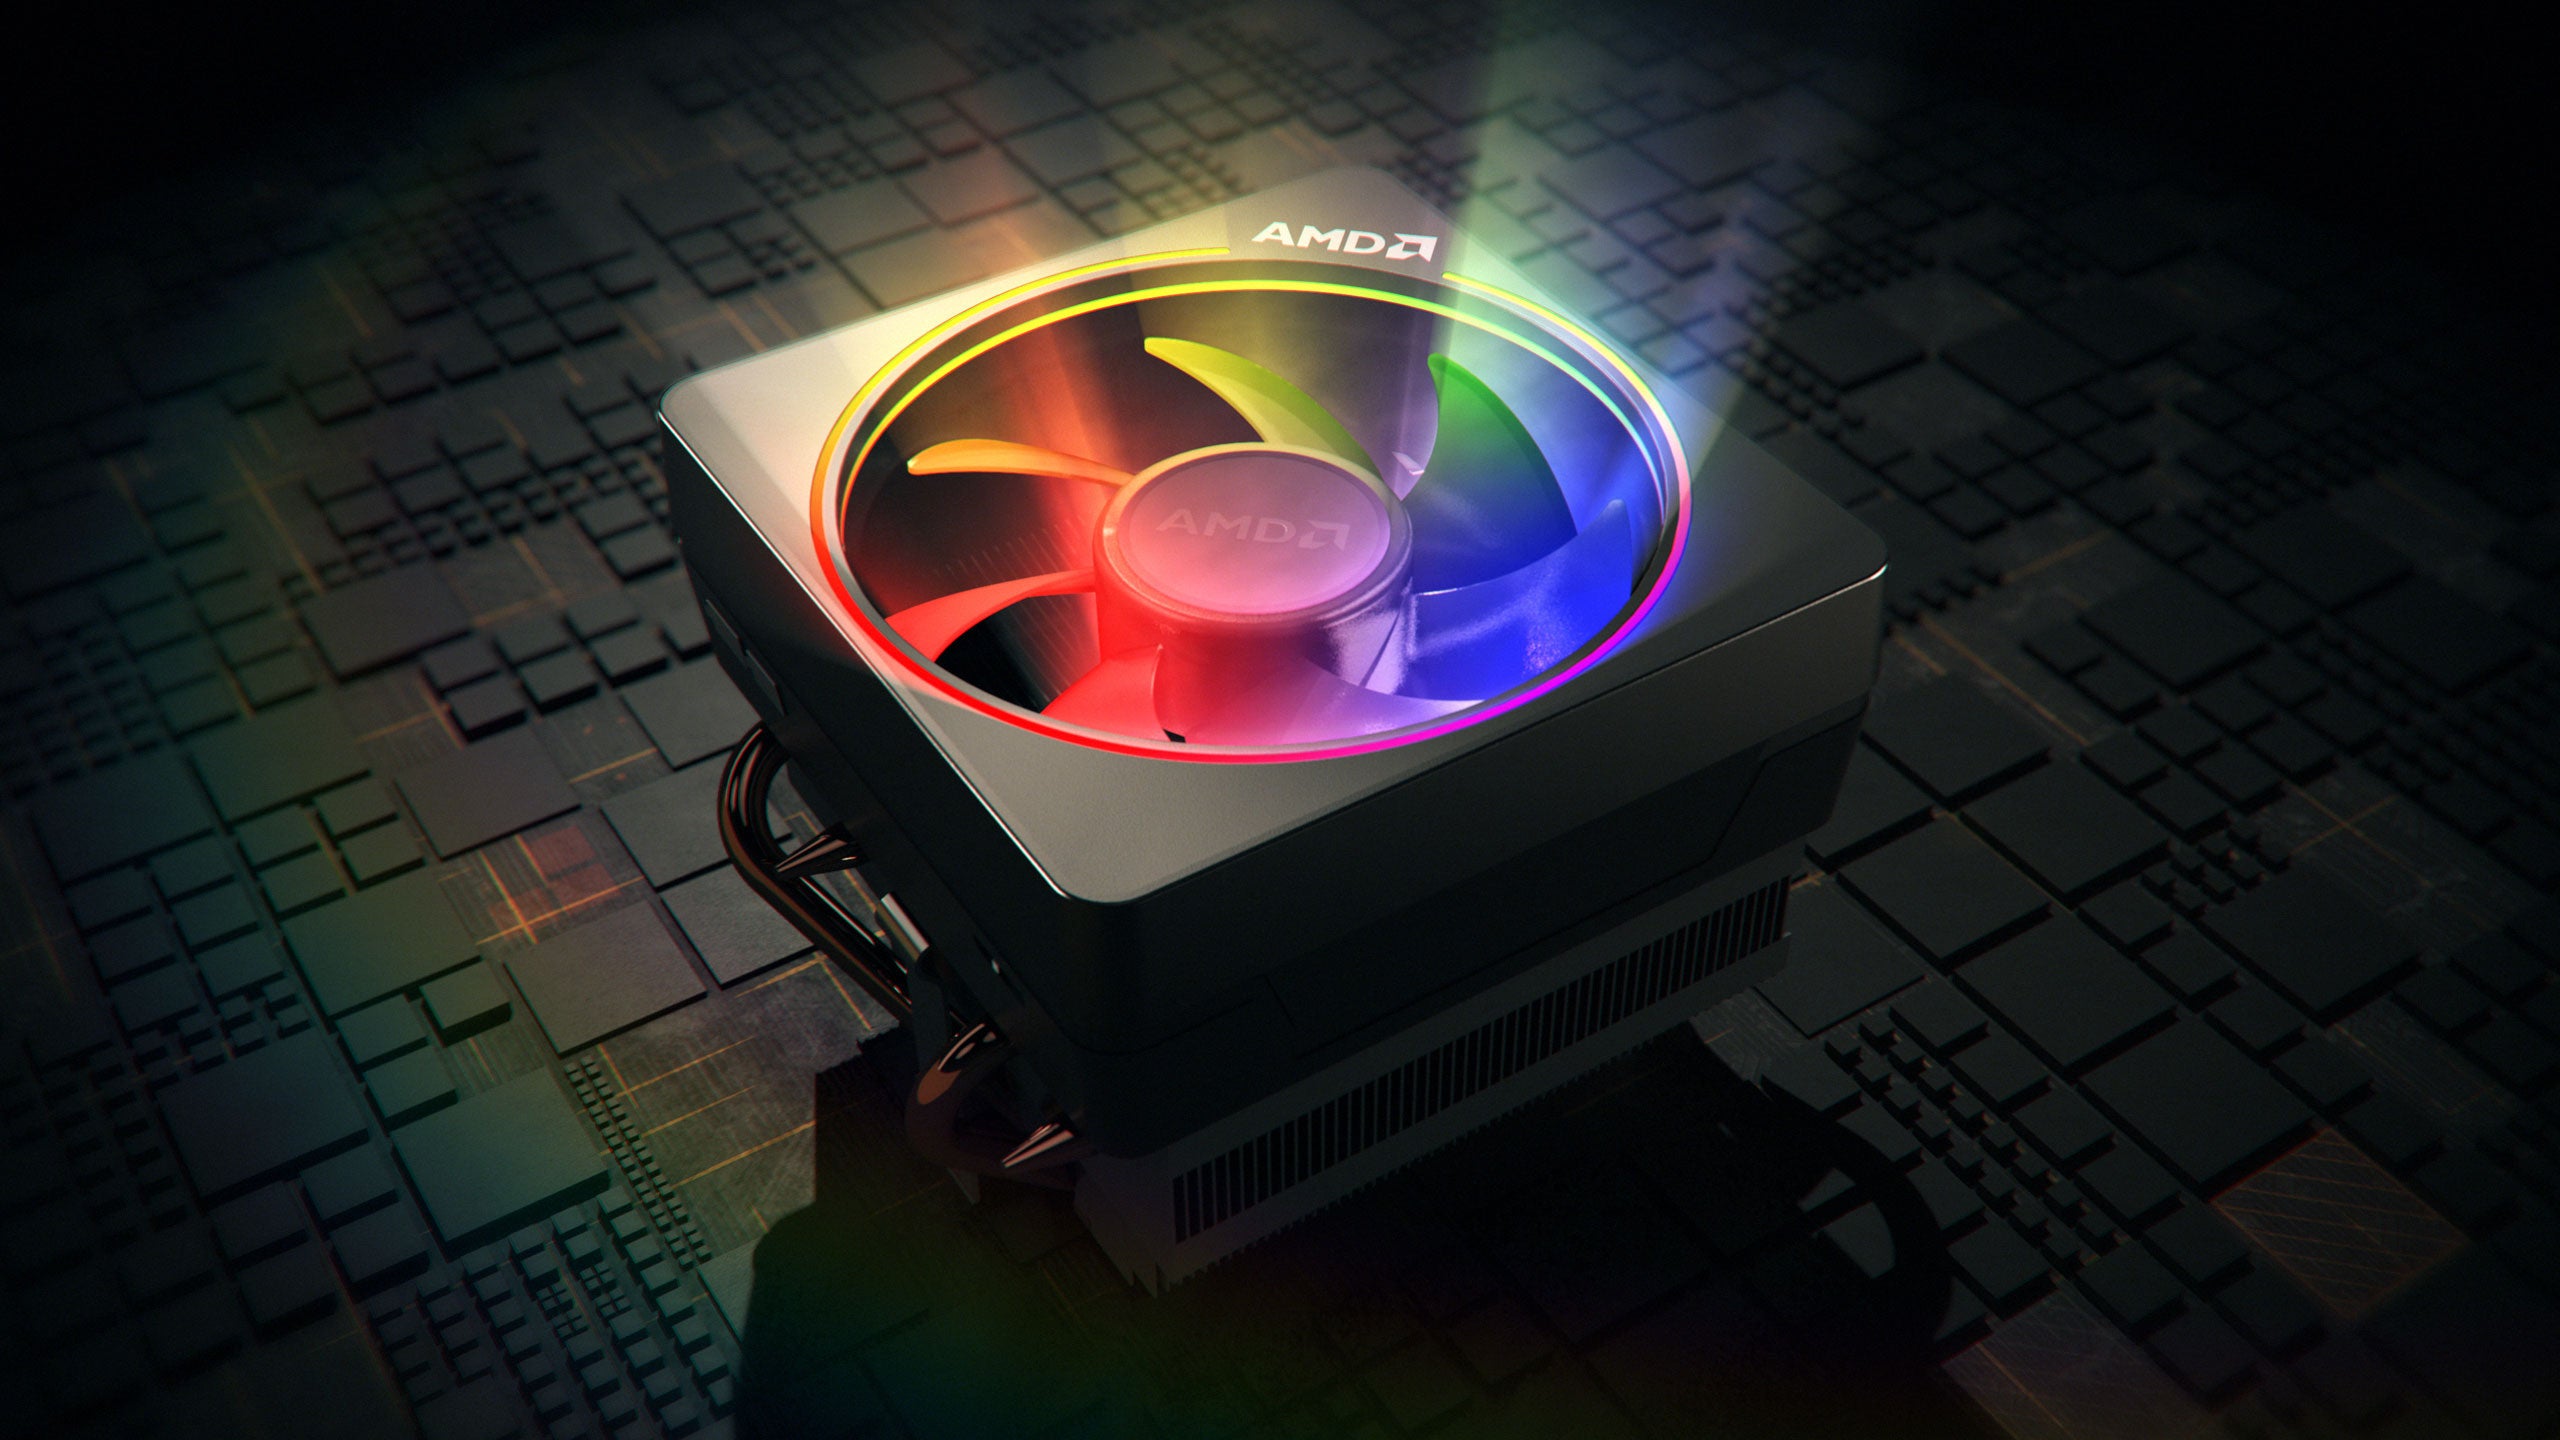 CG render of AMD Wraith Spire cooler with glowing RGB lights